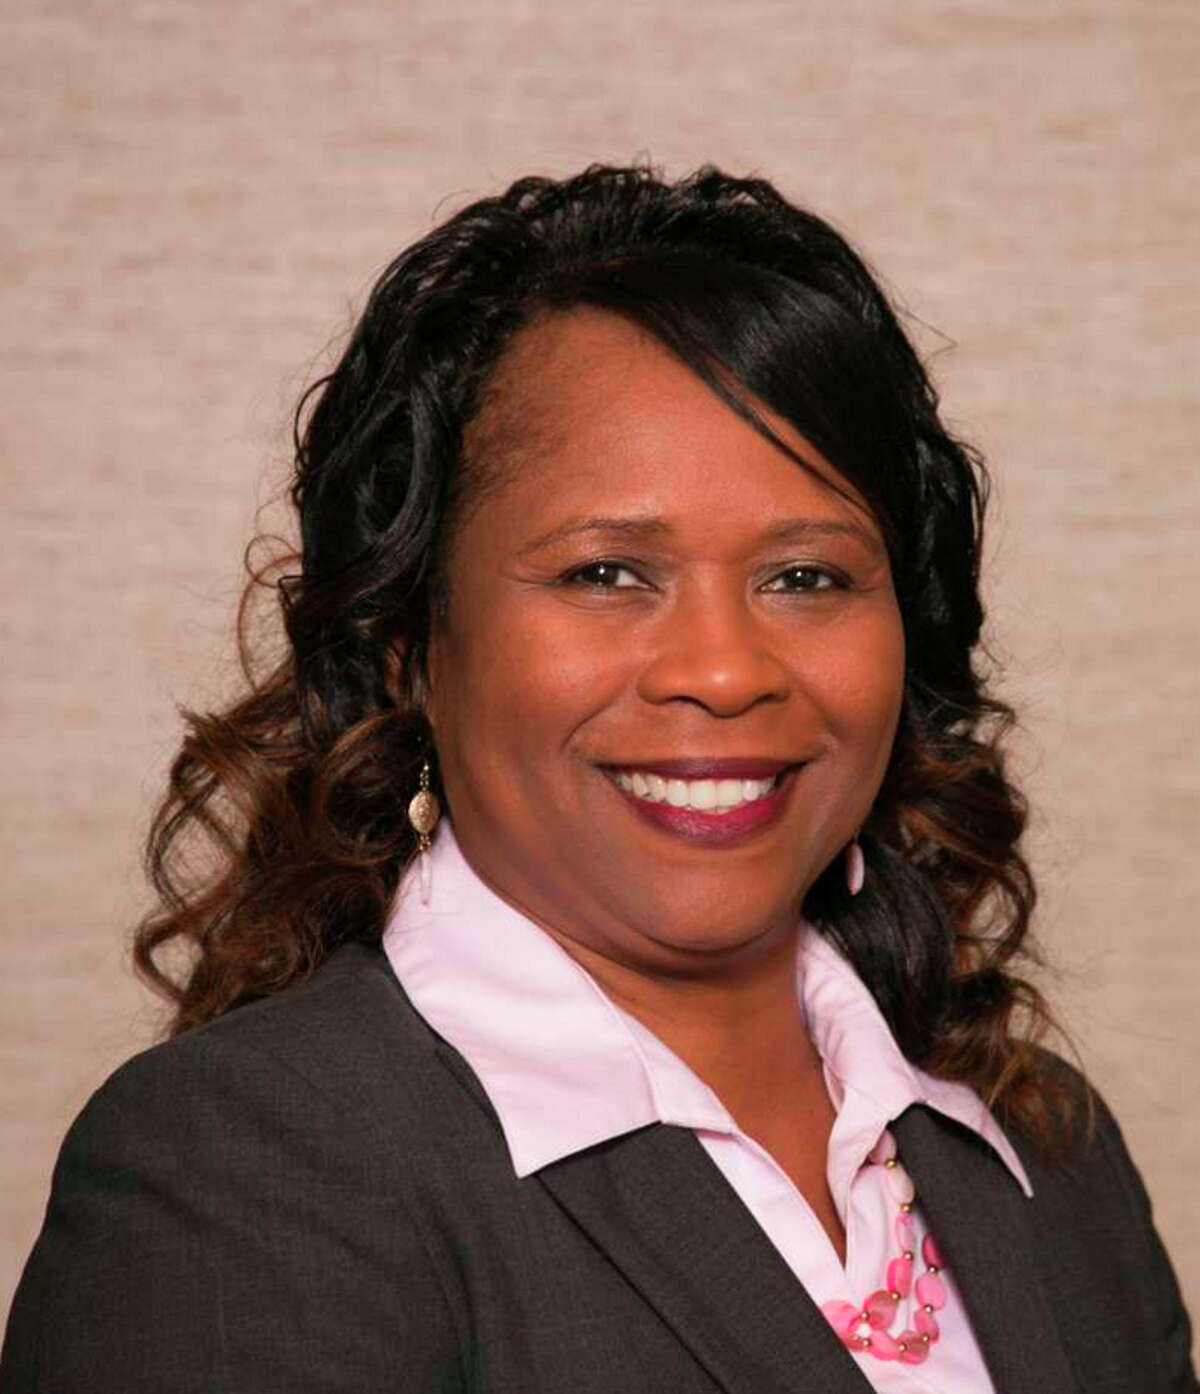 Chenise LeDoux, the 37th Houston postmaster, was installed on March 17, 2017. She had been serving in the role for a year and is the former Katy postmaster. She began her career in 1987 as a clerk in Charlotte, North Carolina.